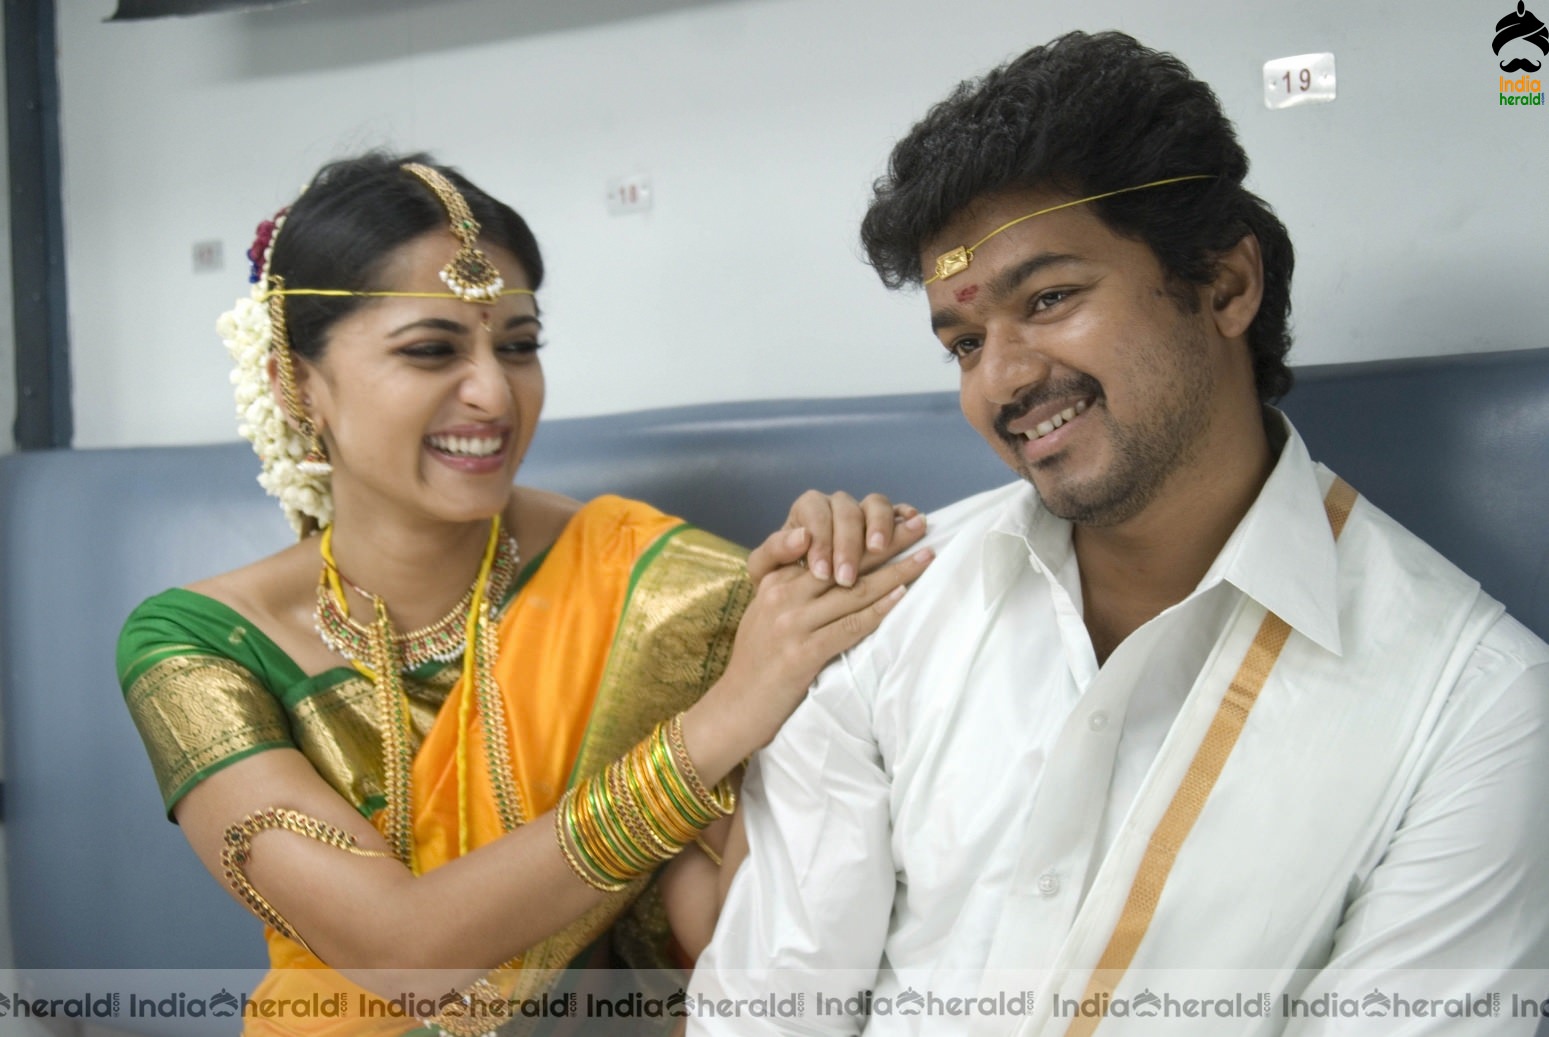 INDIA HERALD EXCLUSIVE Hot Anushka Shetty and Vijay in a Tamil movie during Early Stages Set 3